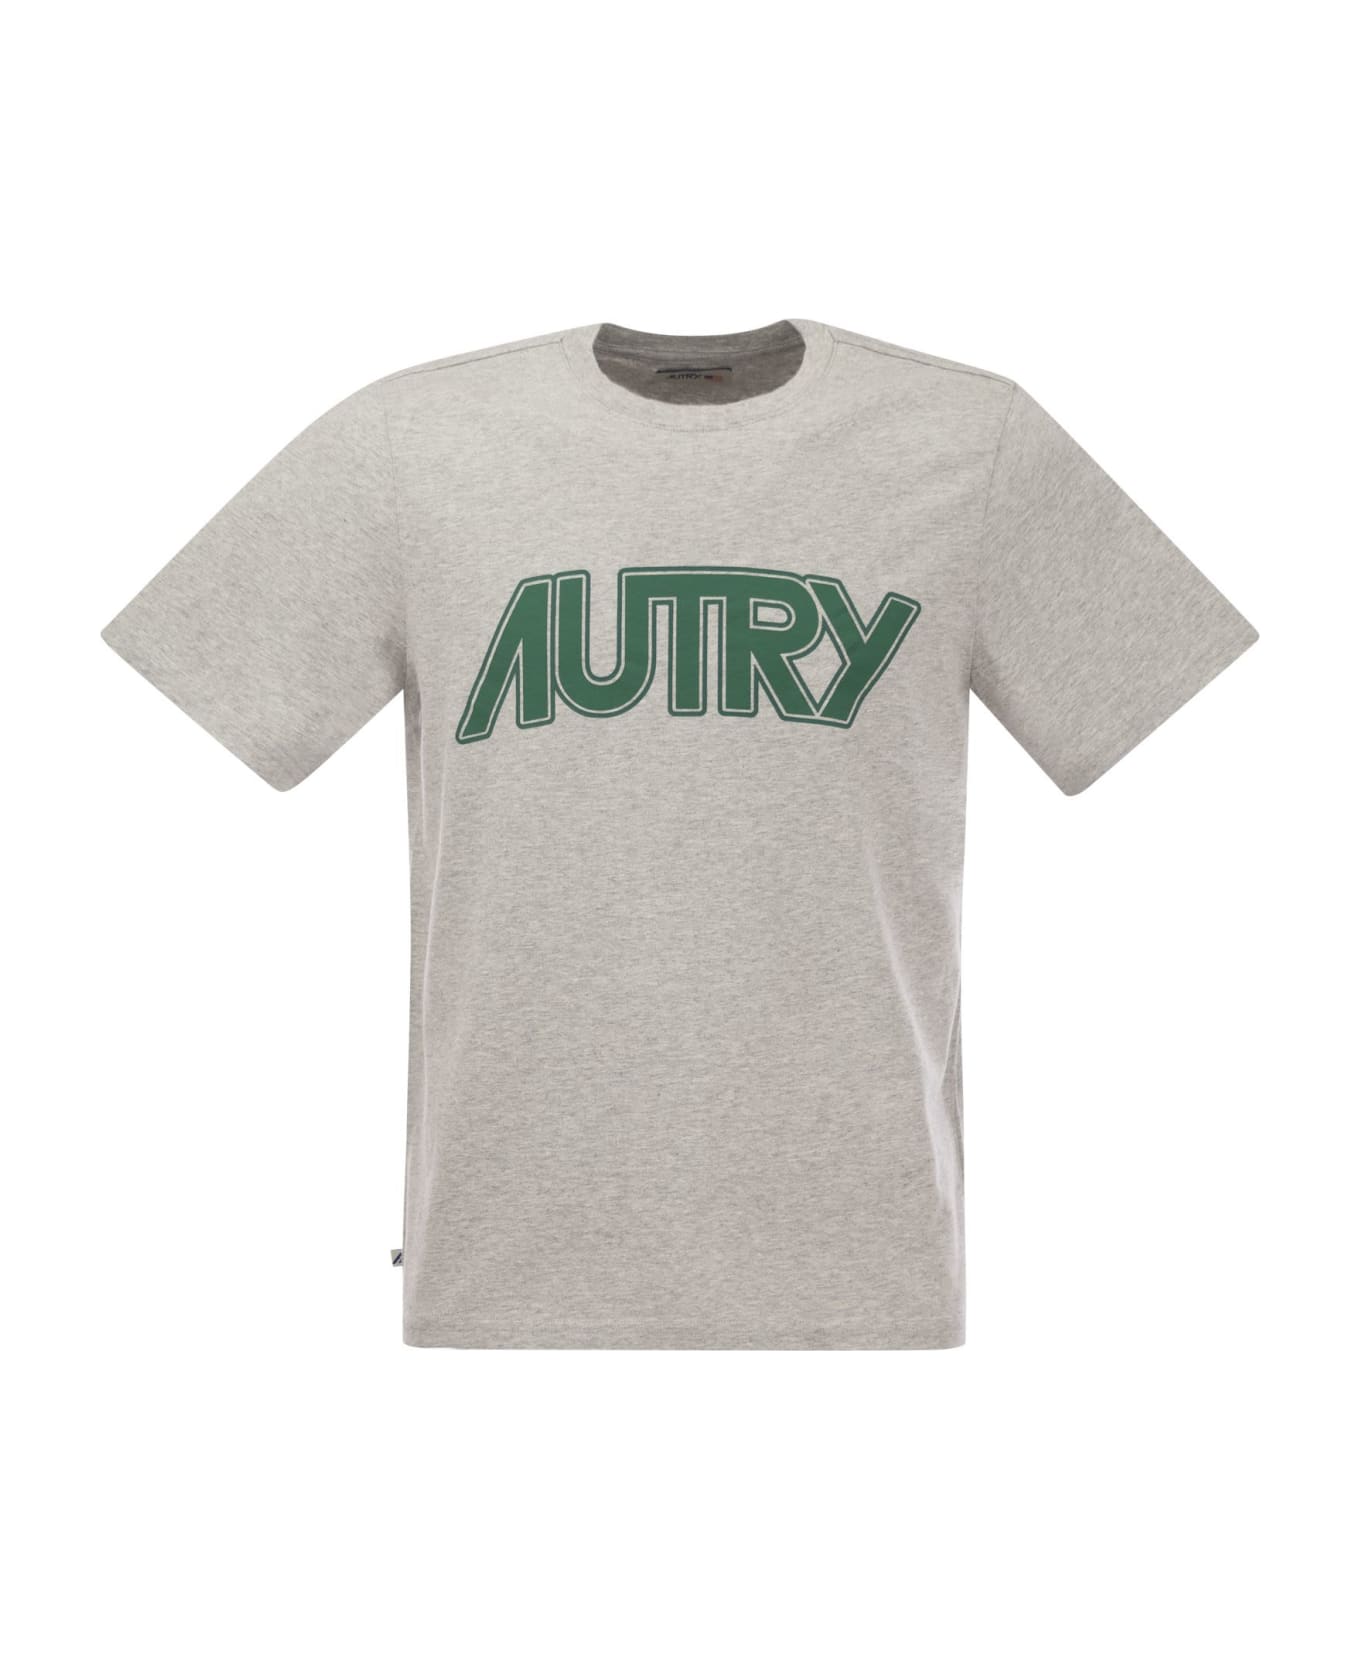 Autry Crew-neck T-shirt With Front Logo - Grey